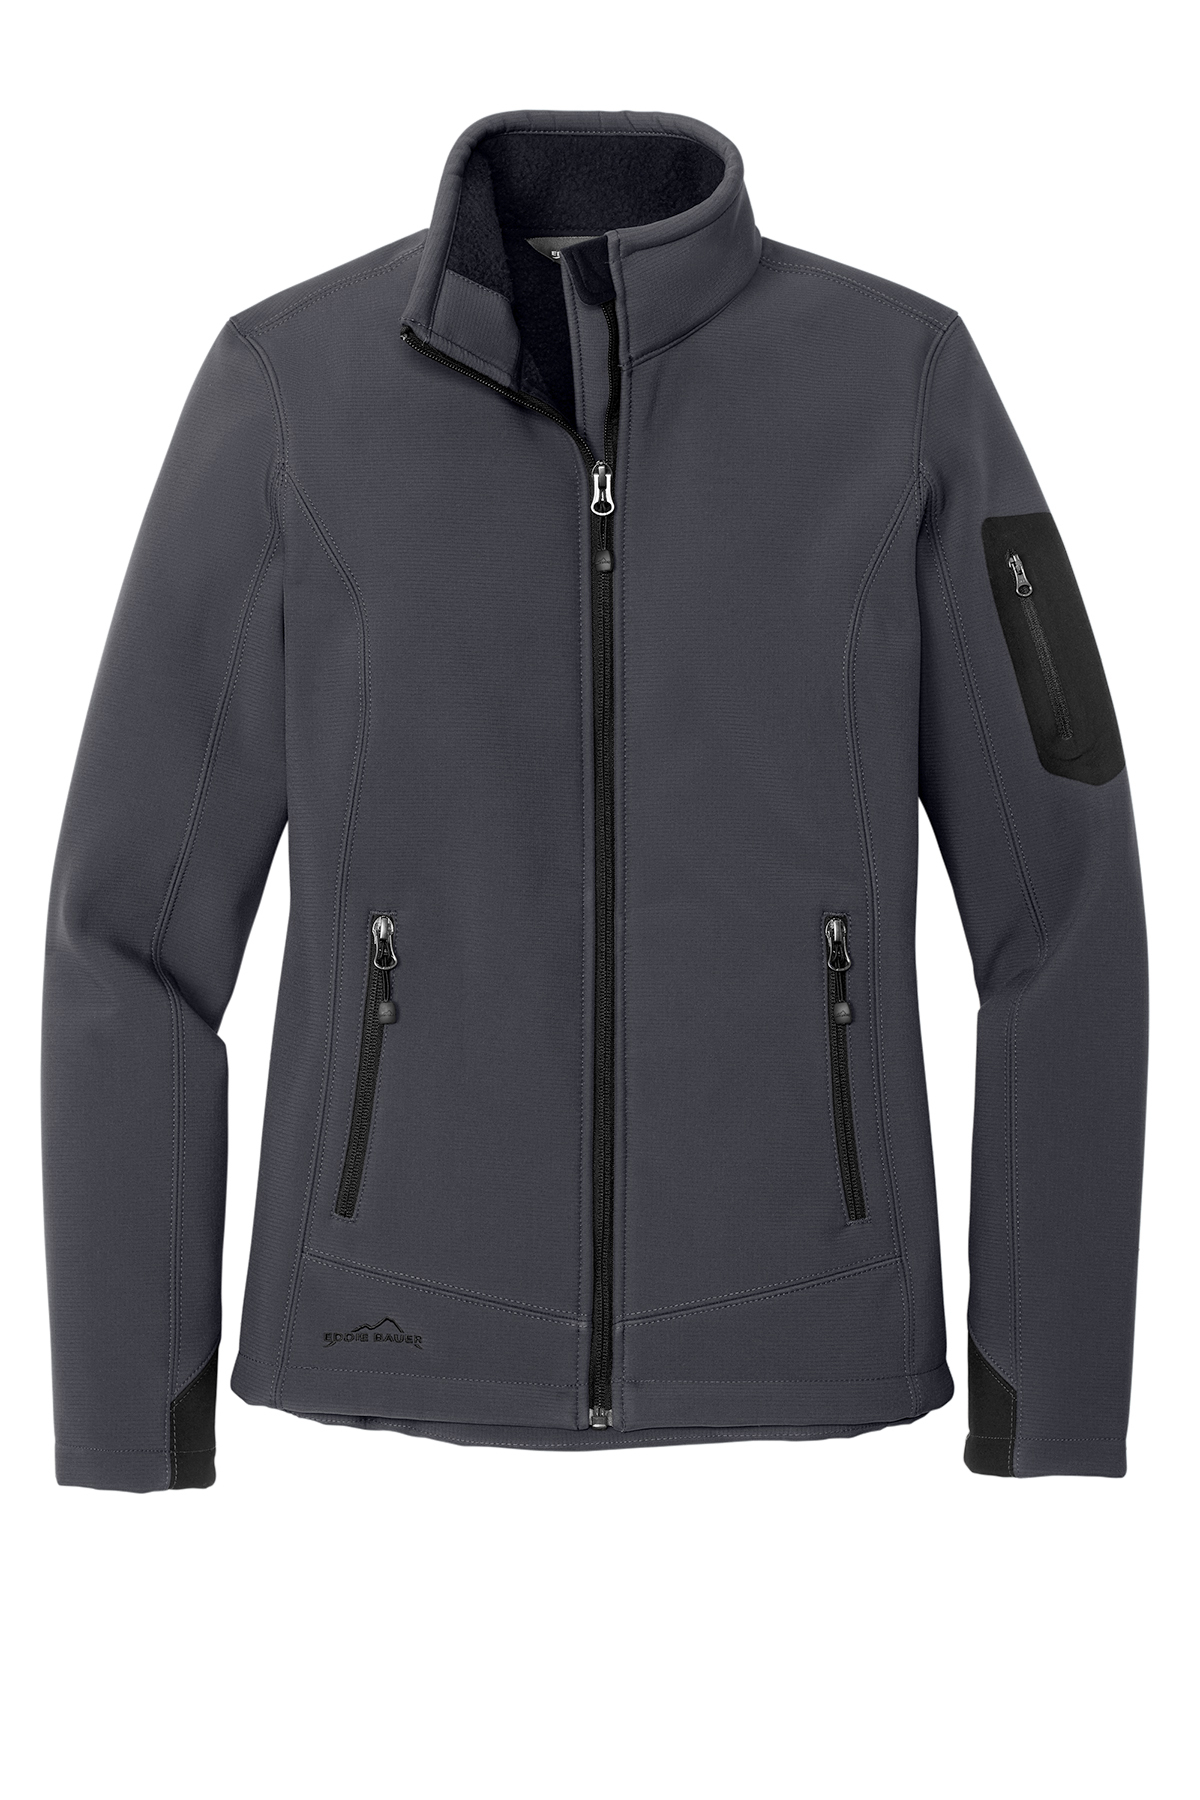 Eddie Bauer Ladies Rugged Ripstop Soft Shell Jacket, Product